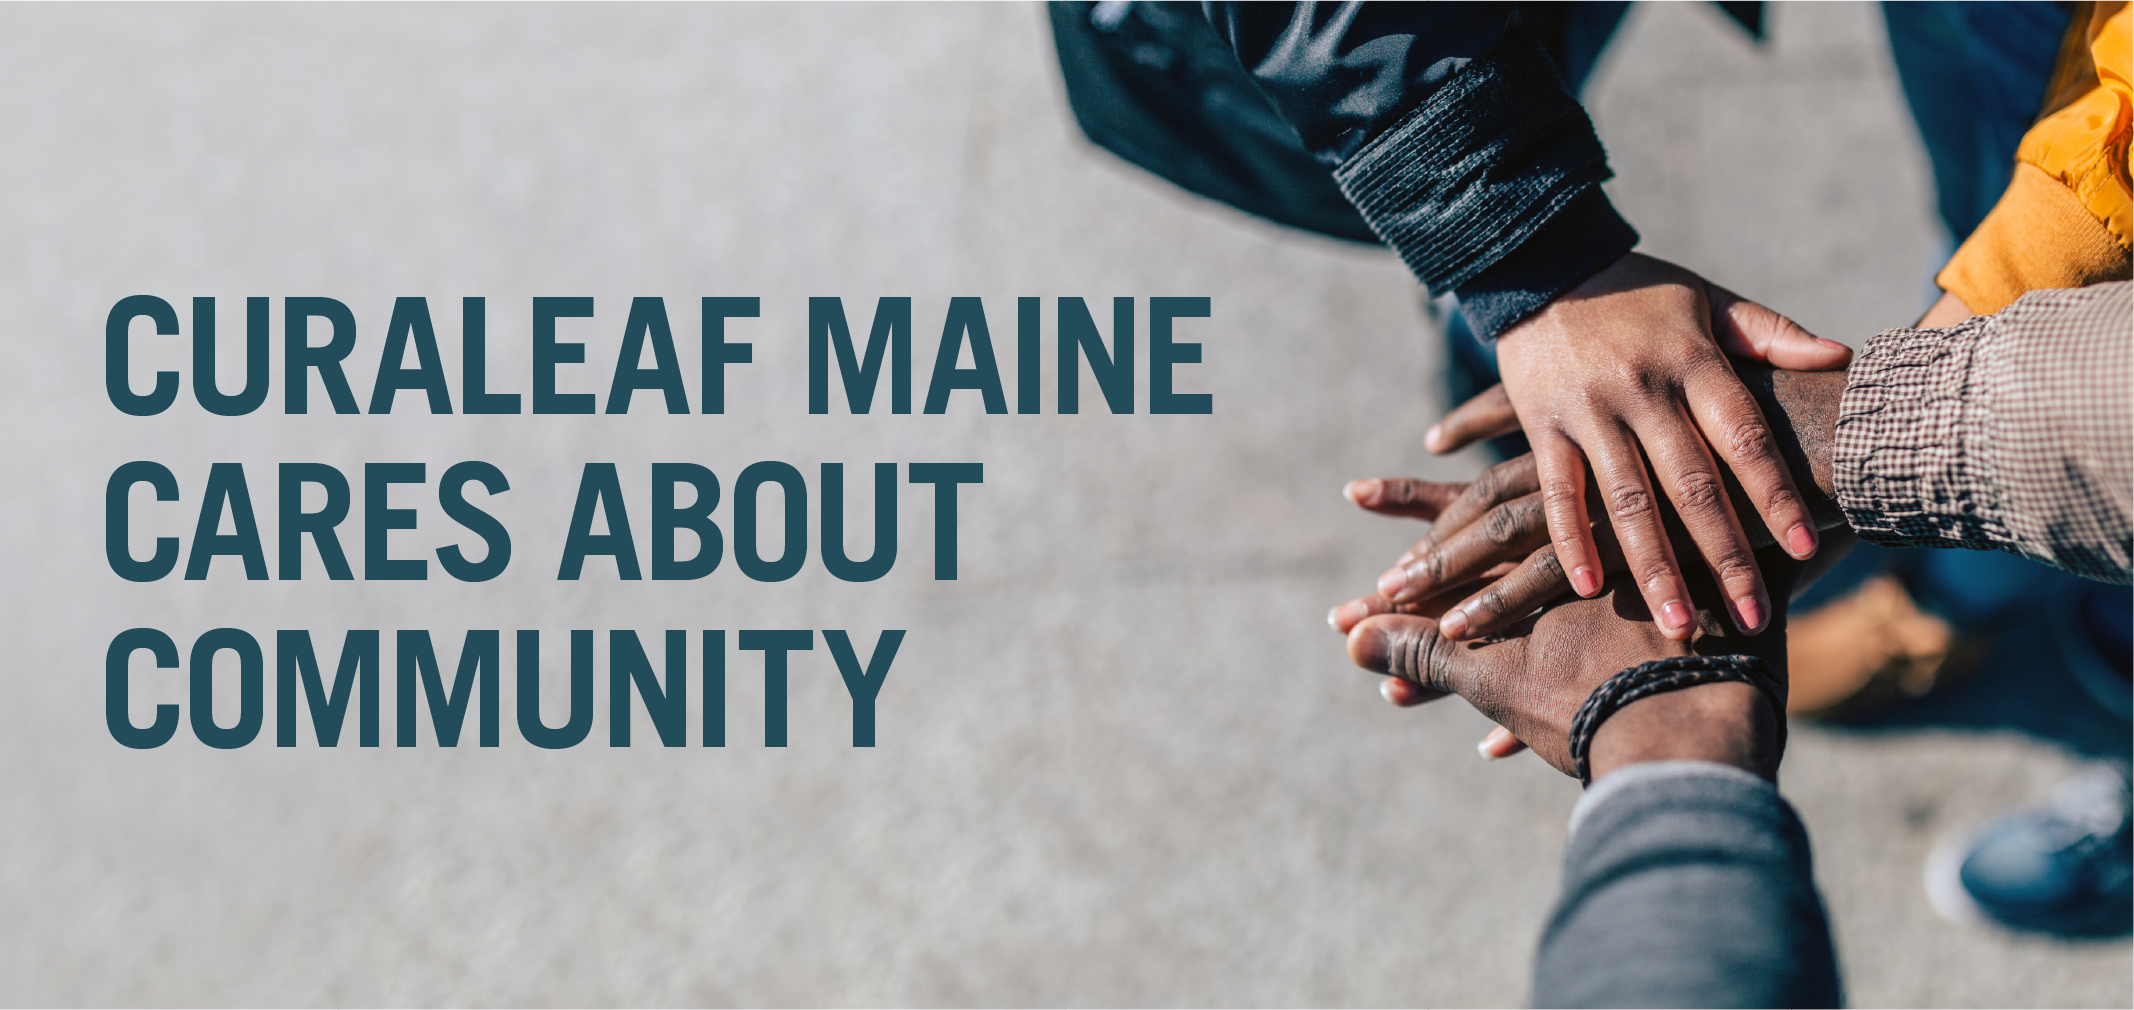 Curaleaf Maine Cares About Community